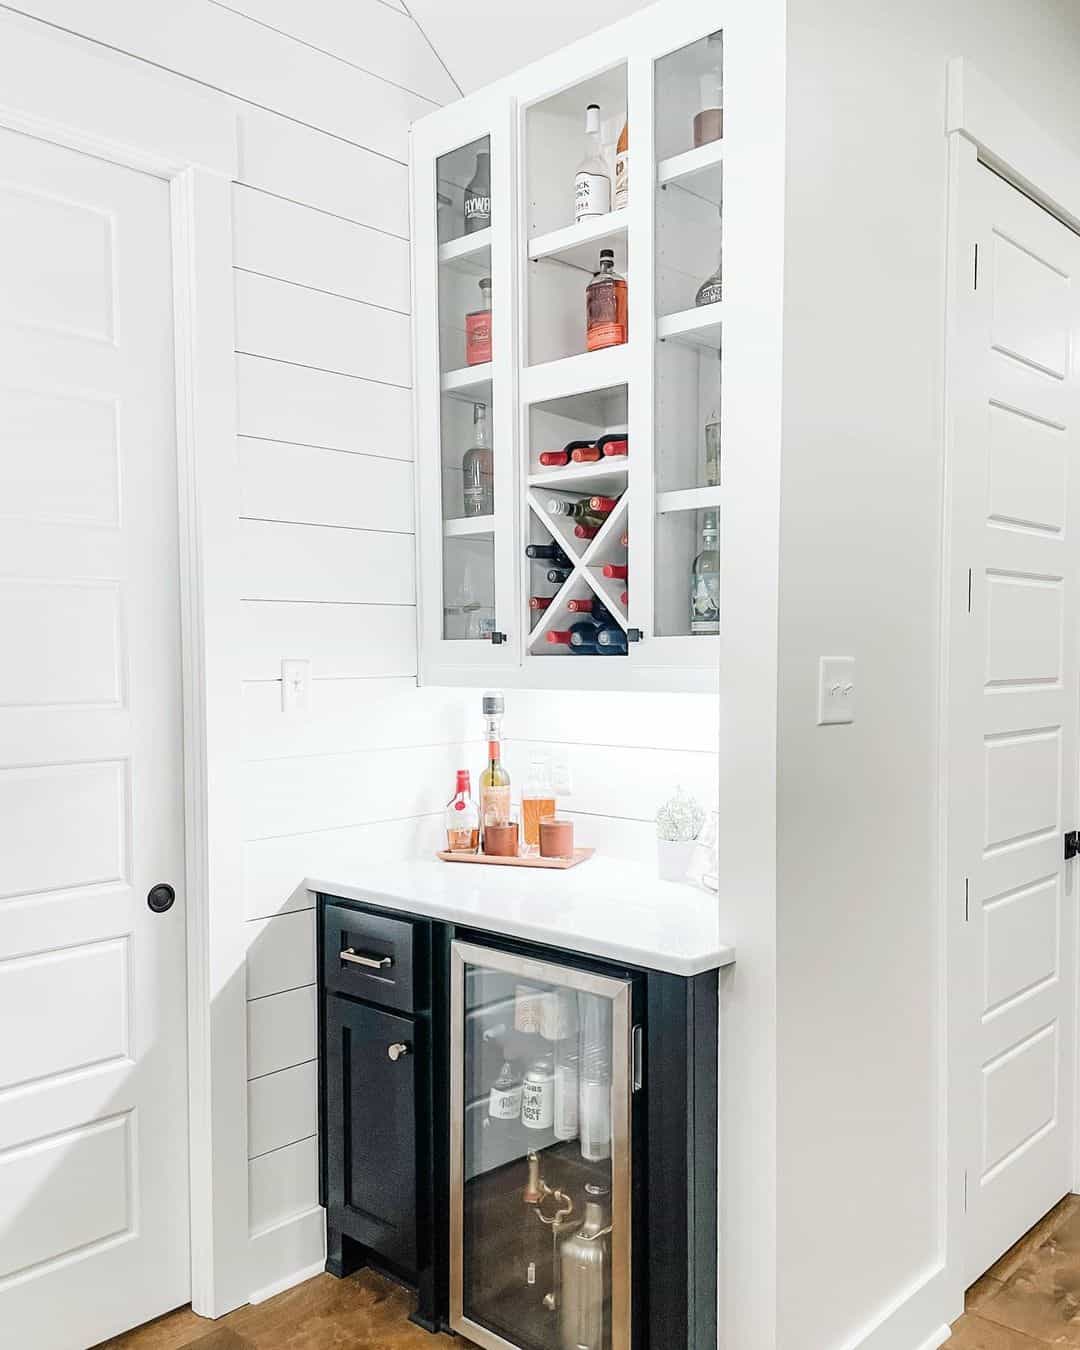 https://www.soulandlane.com/wp-content/uploads/2023/01/Ideas-for-a-Small-Beverage-Station-With-a-Wine-Rack.jpg